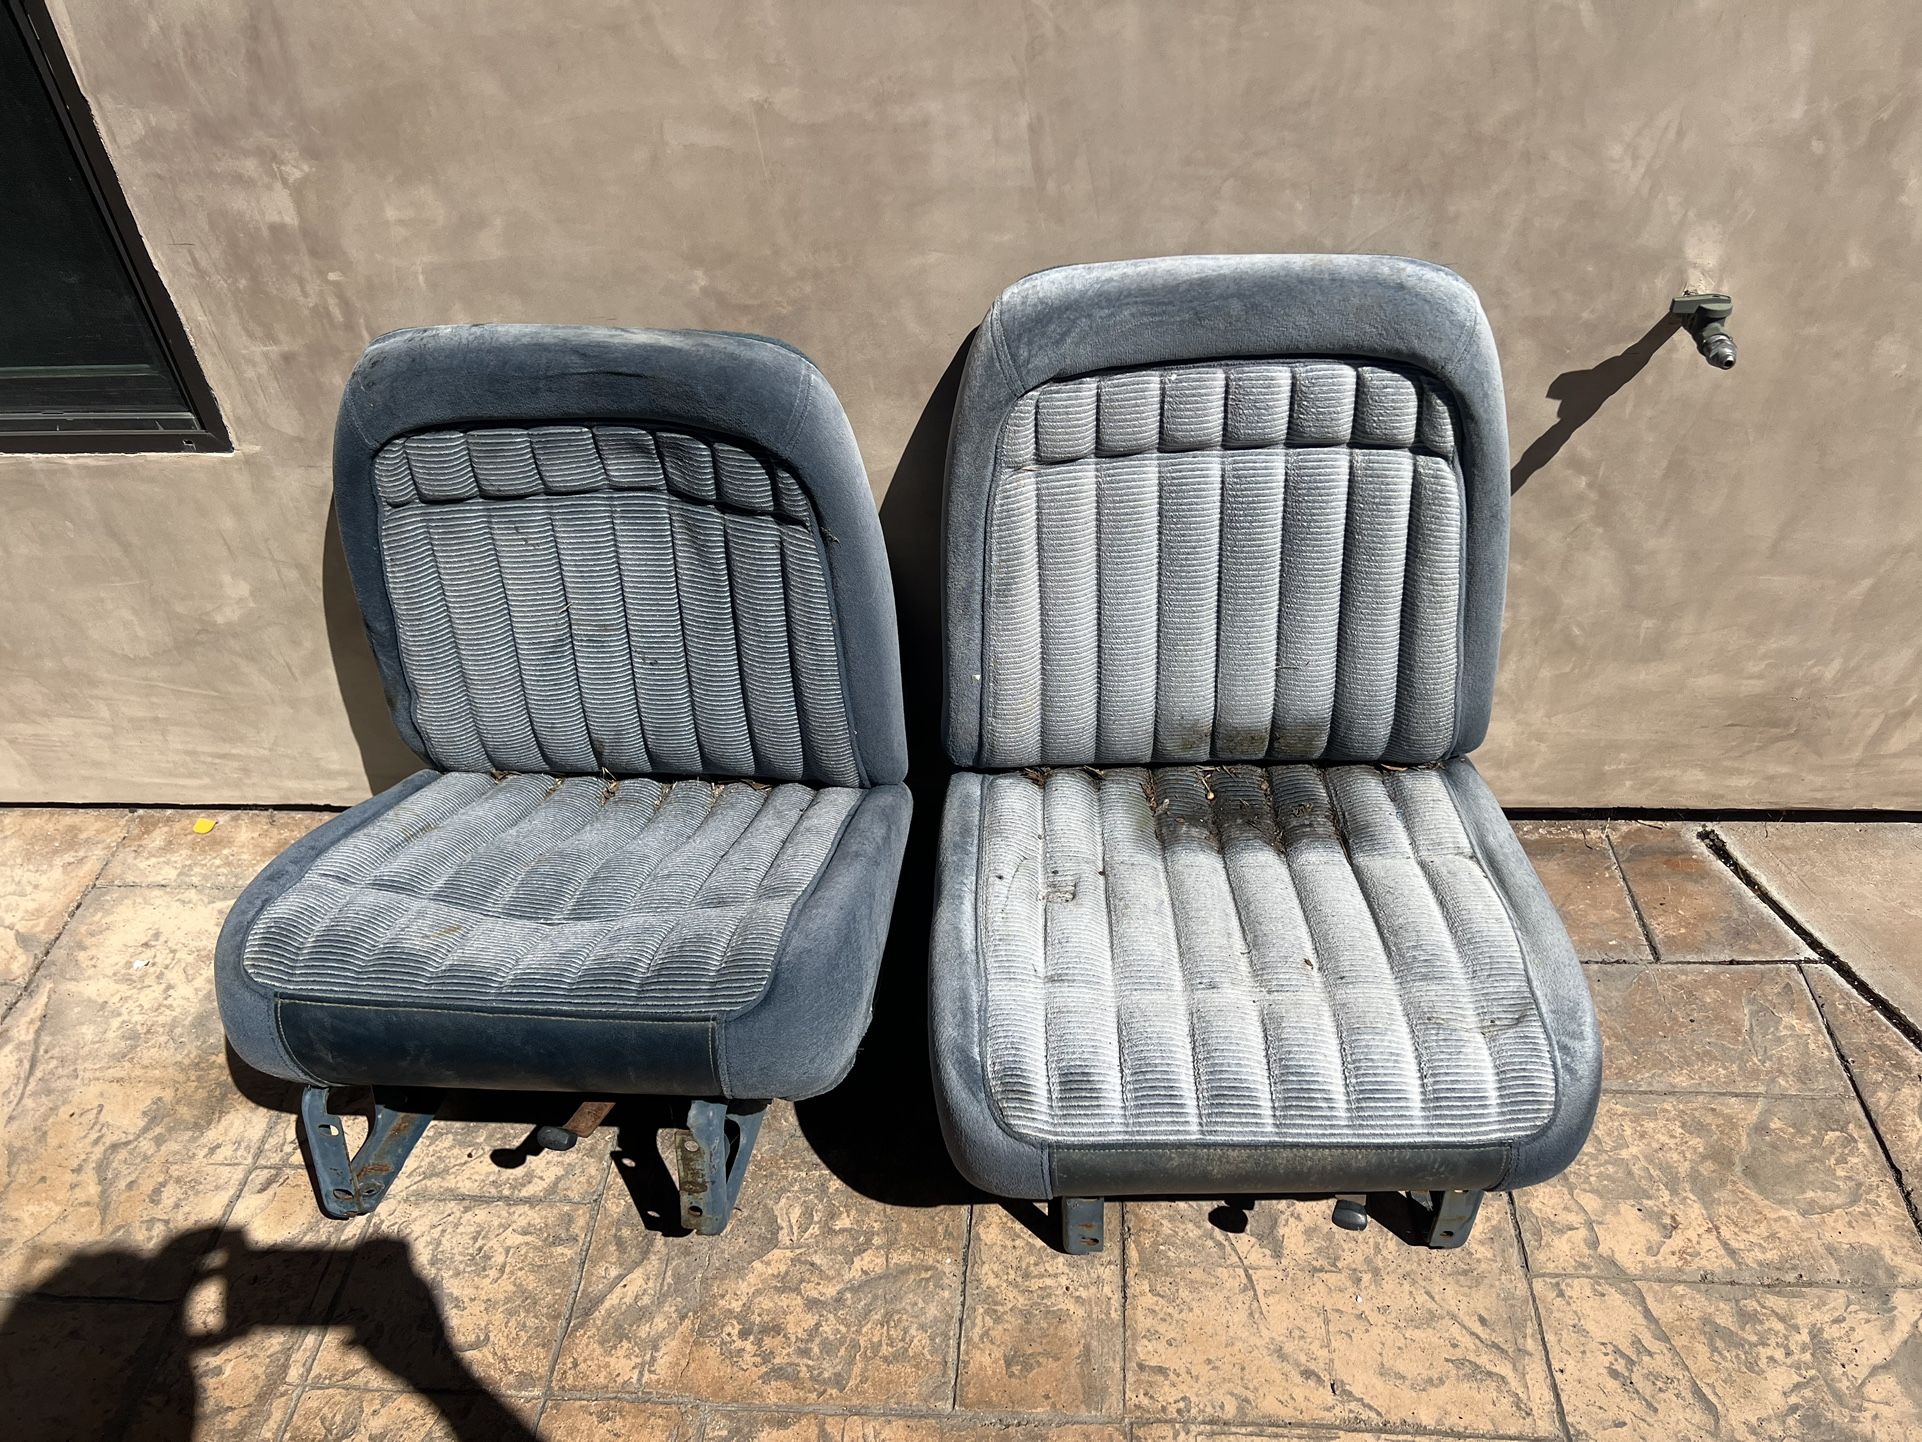 OBS Seats For Sale 